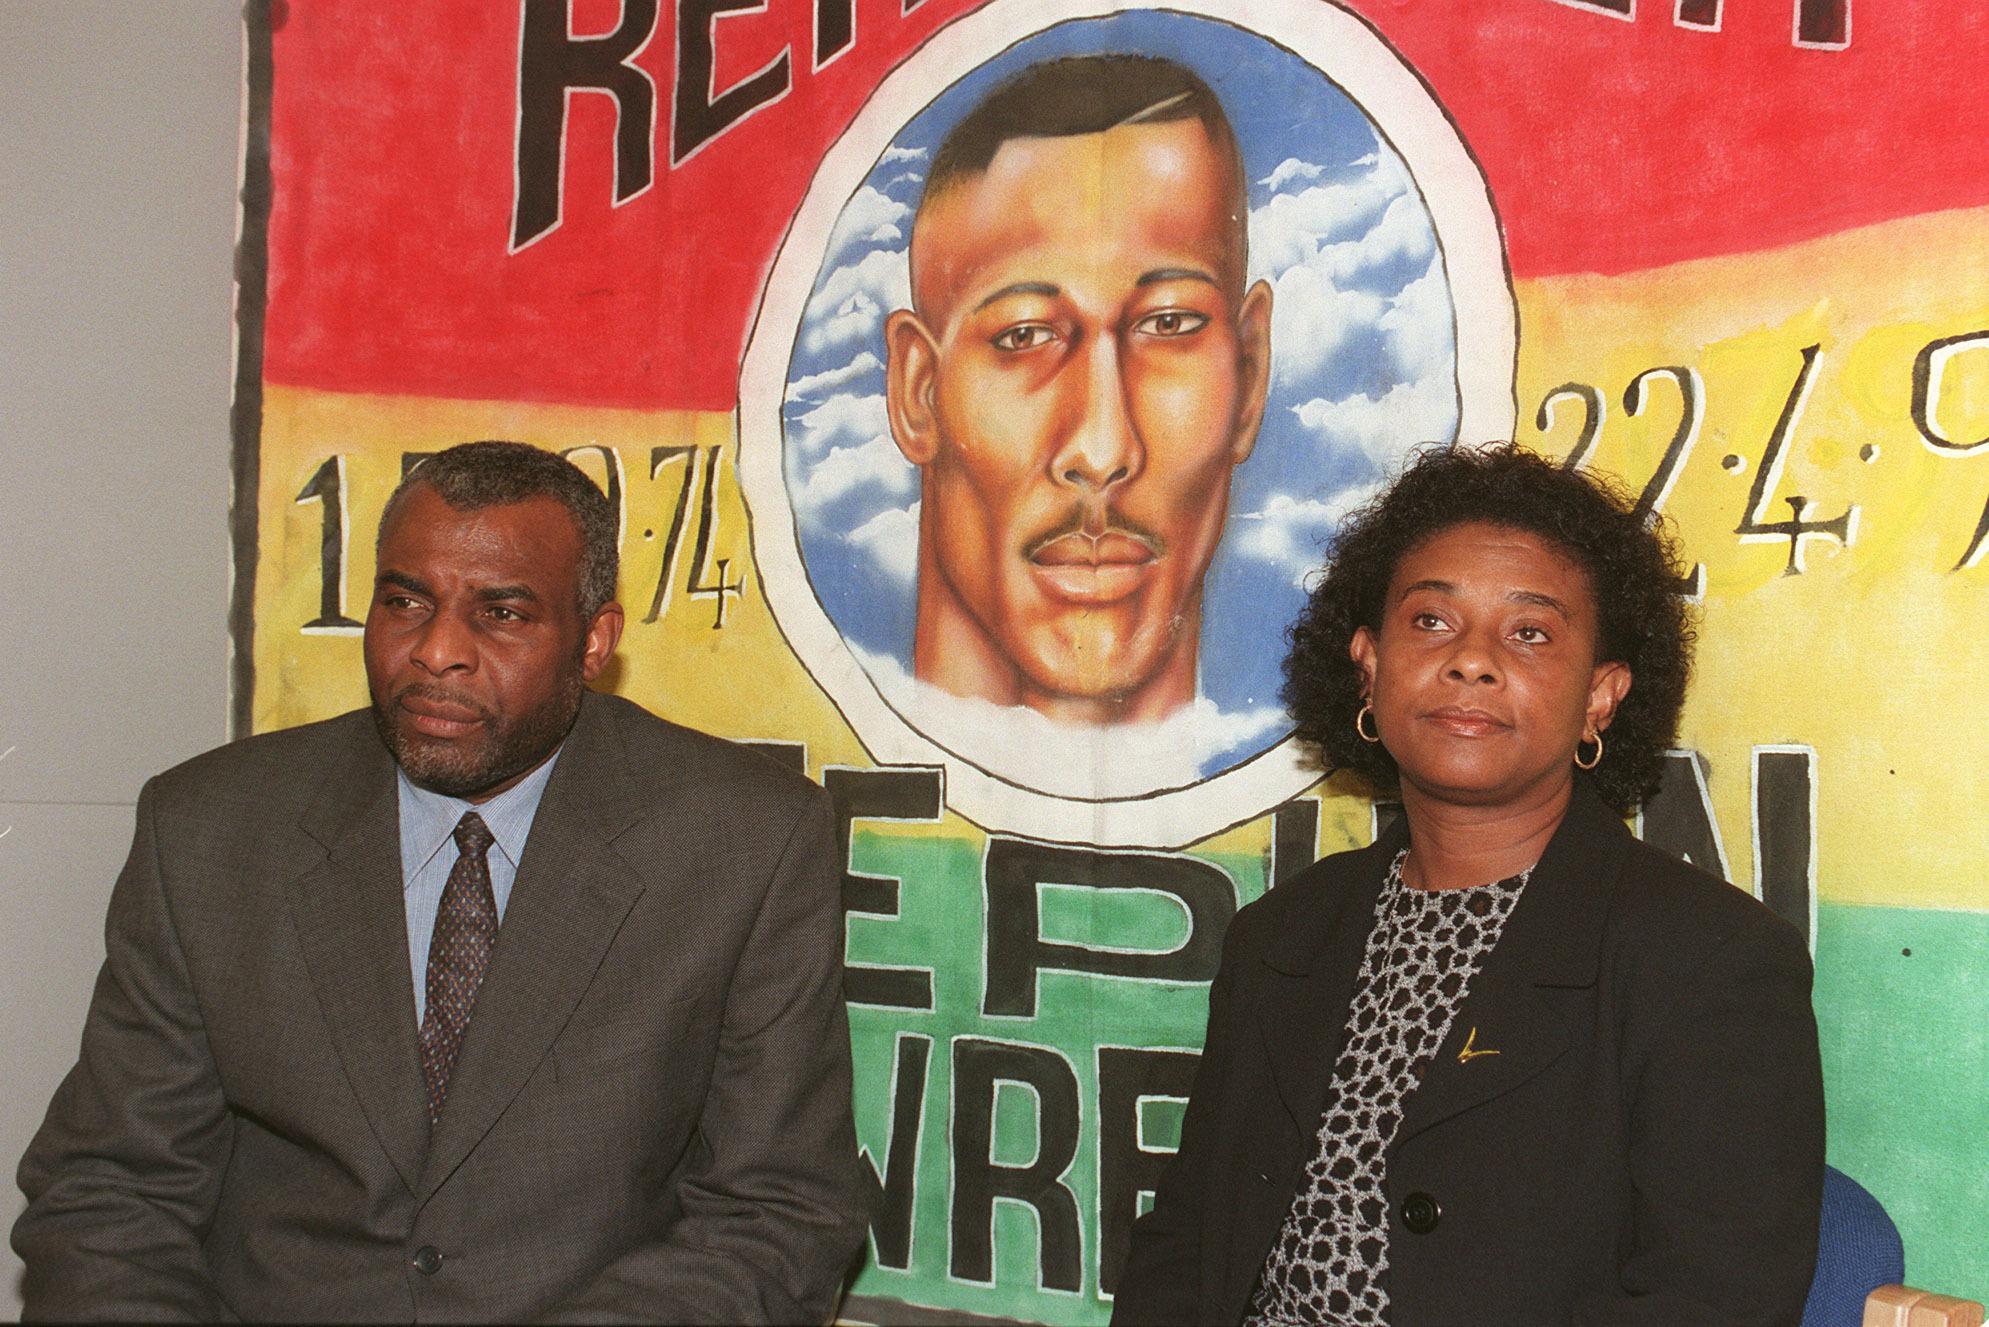 Stephen Lawrence’s parents, Neville and Doreen